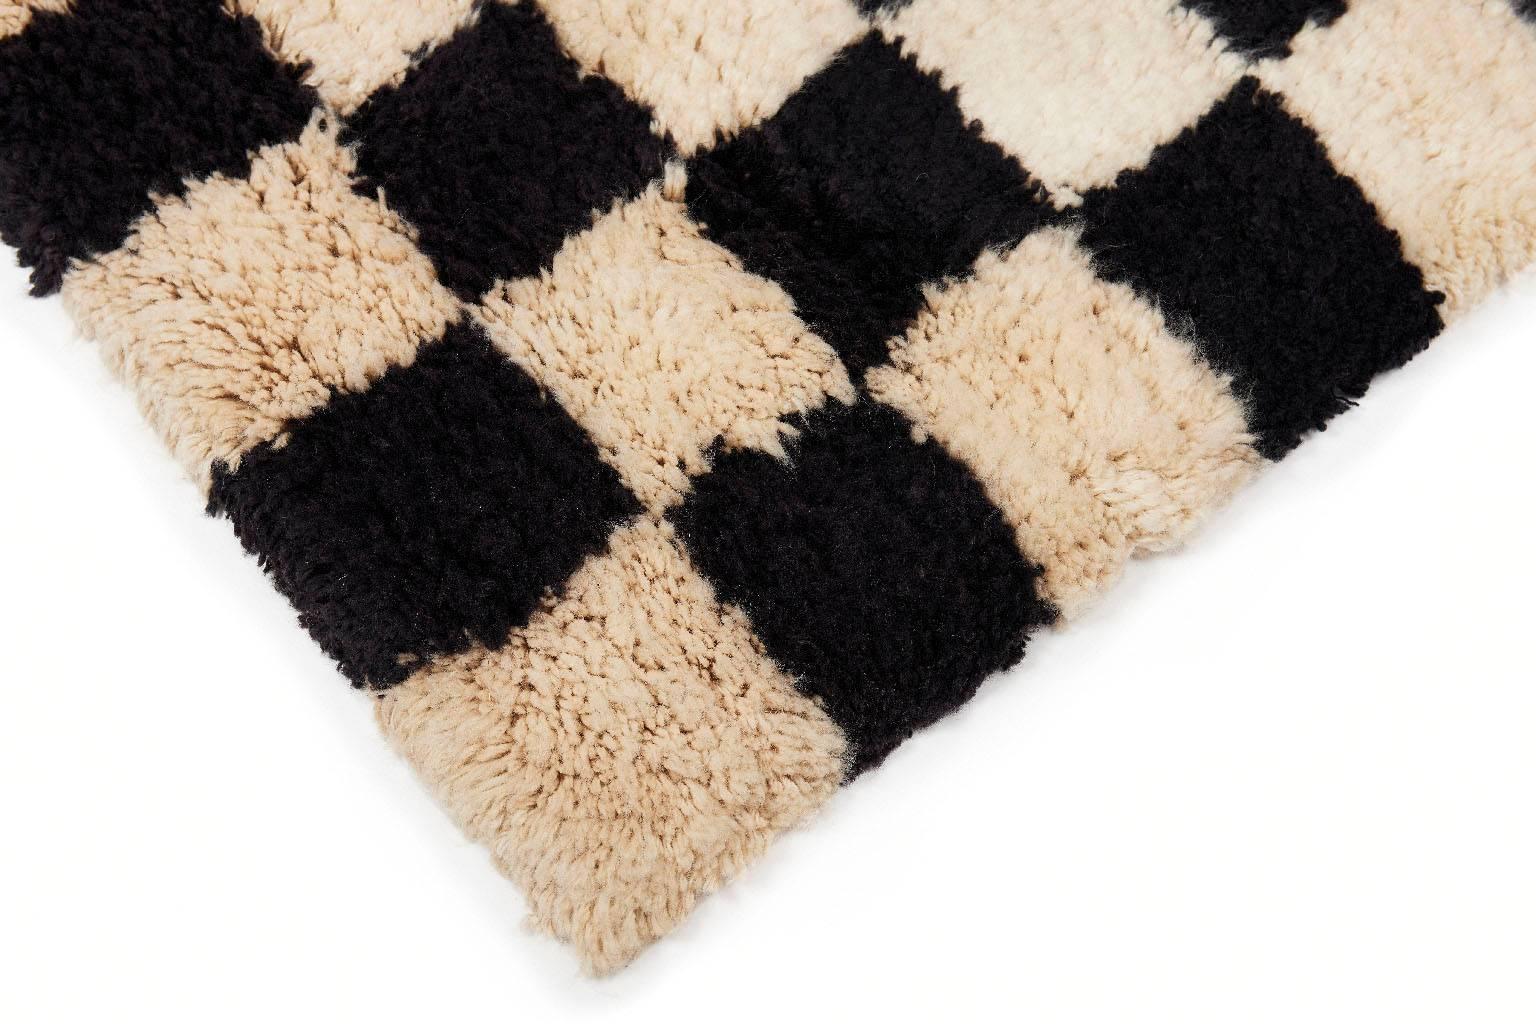 The ultimate rug for lounging, reading, or sleeping. The checkerboard black and white shag rug is hand-knotted with 100% high quality New Zealand wool. Super soft and plush with a Classic design. Designed by Aelfie. Measures: 8'x 10'.